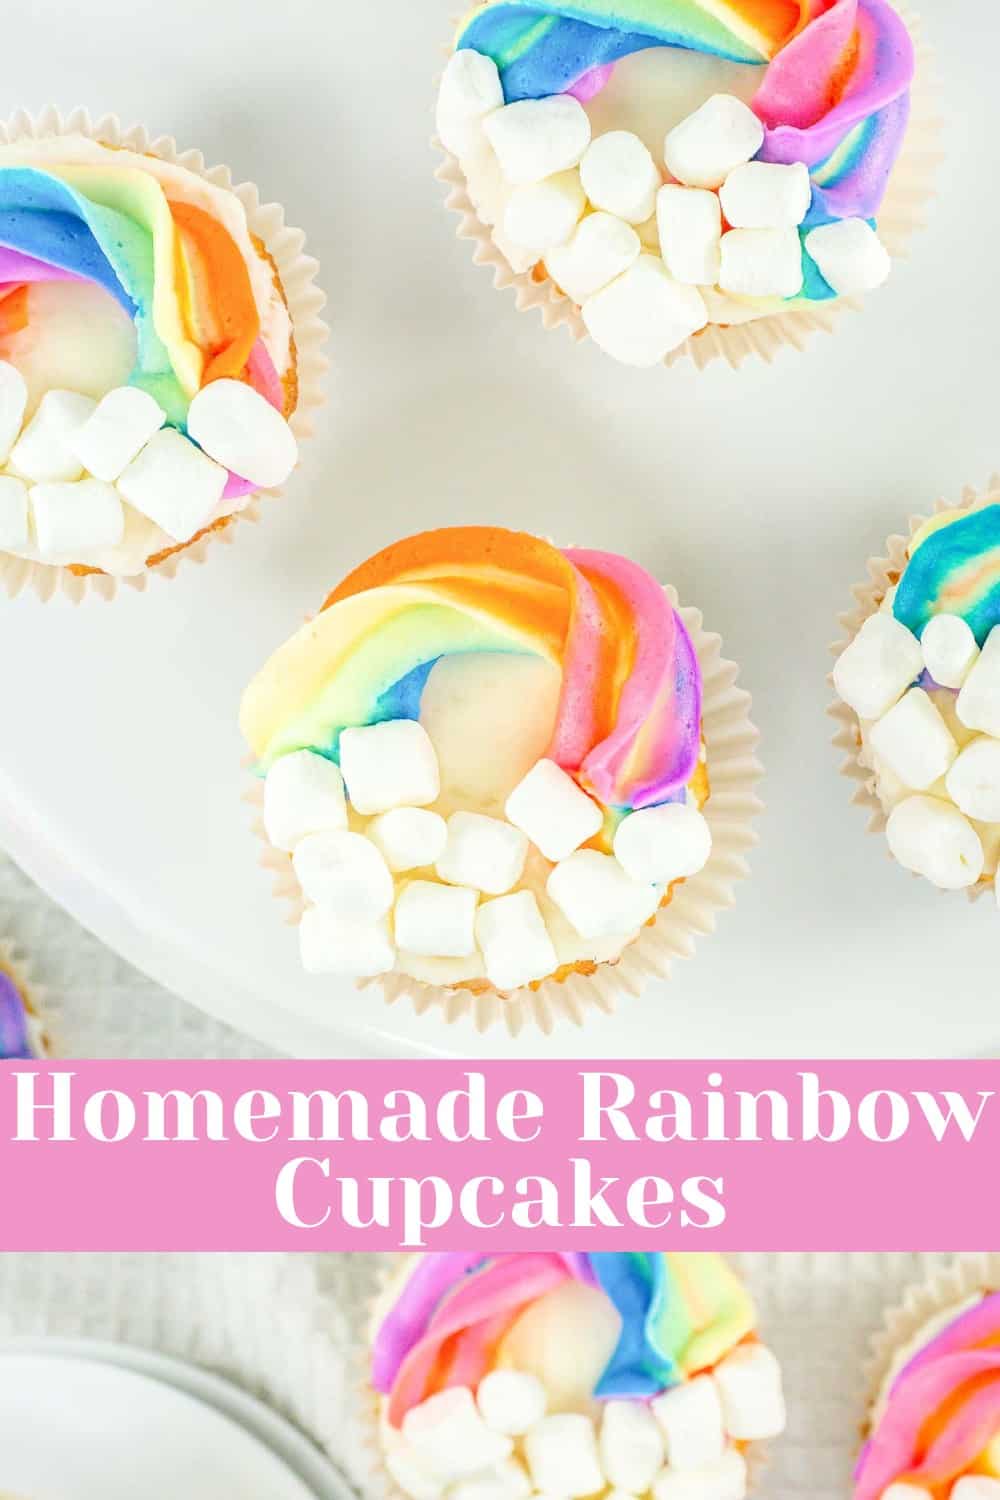 Colorful homemade rainbow cupcakes decorated with marshmallows.